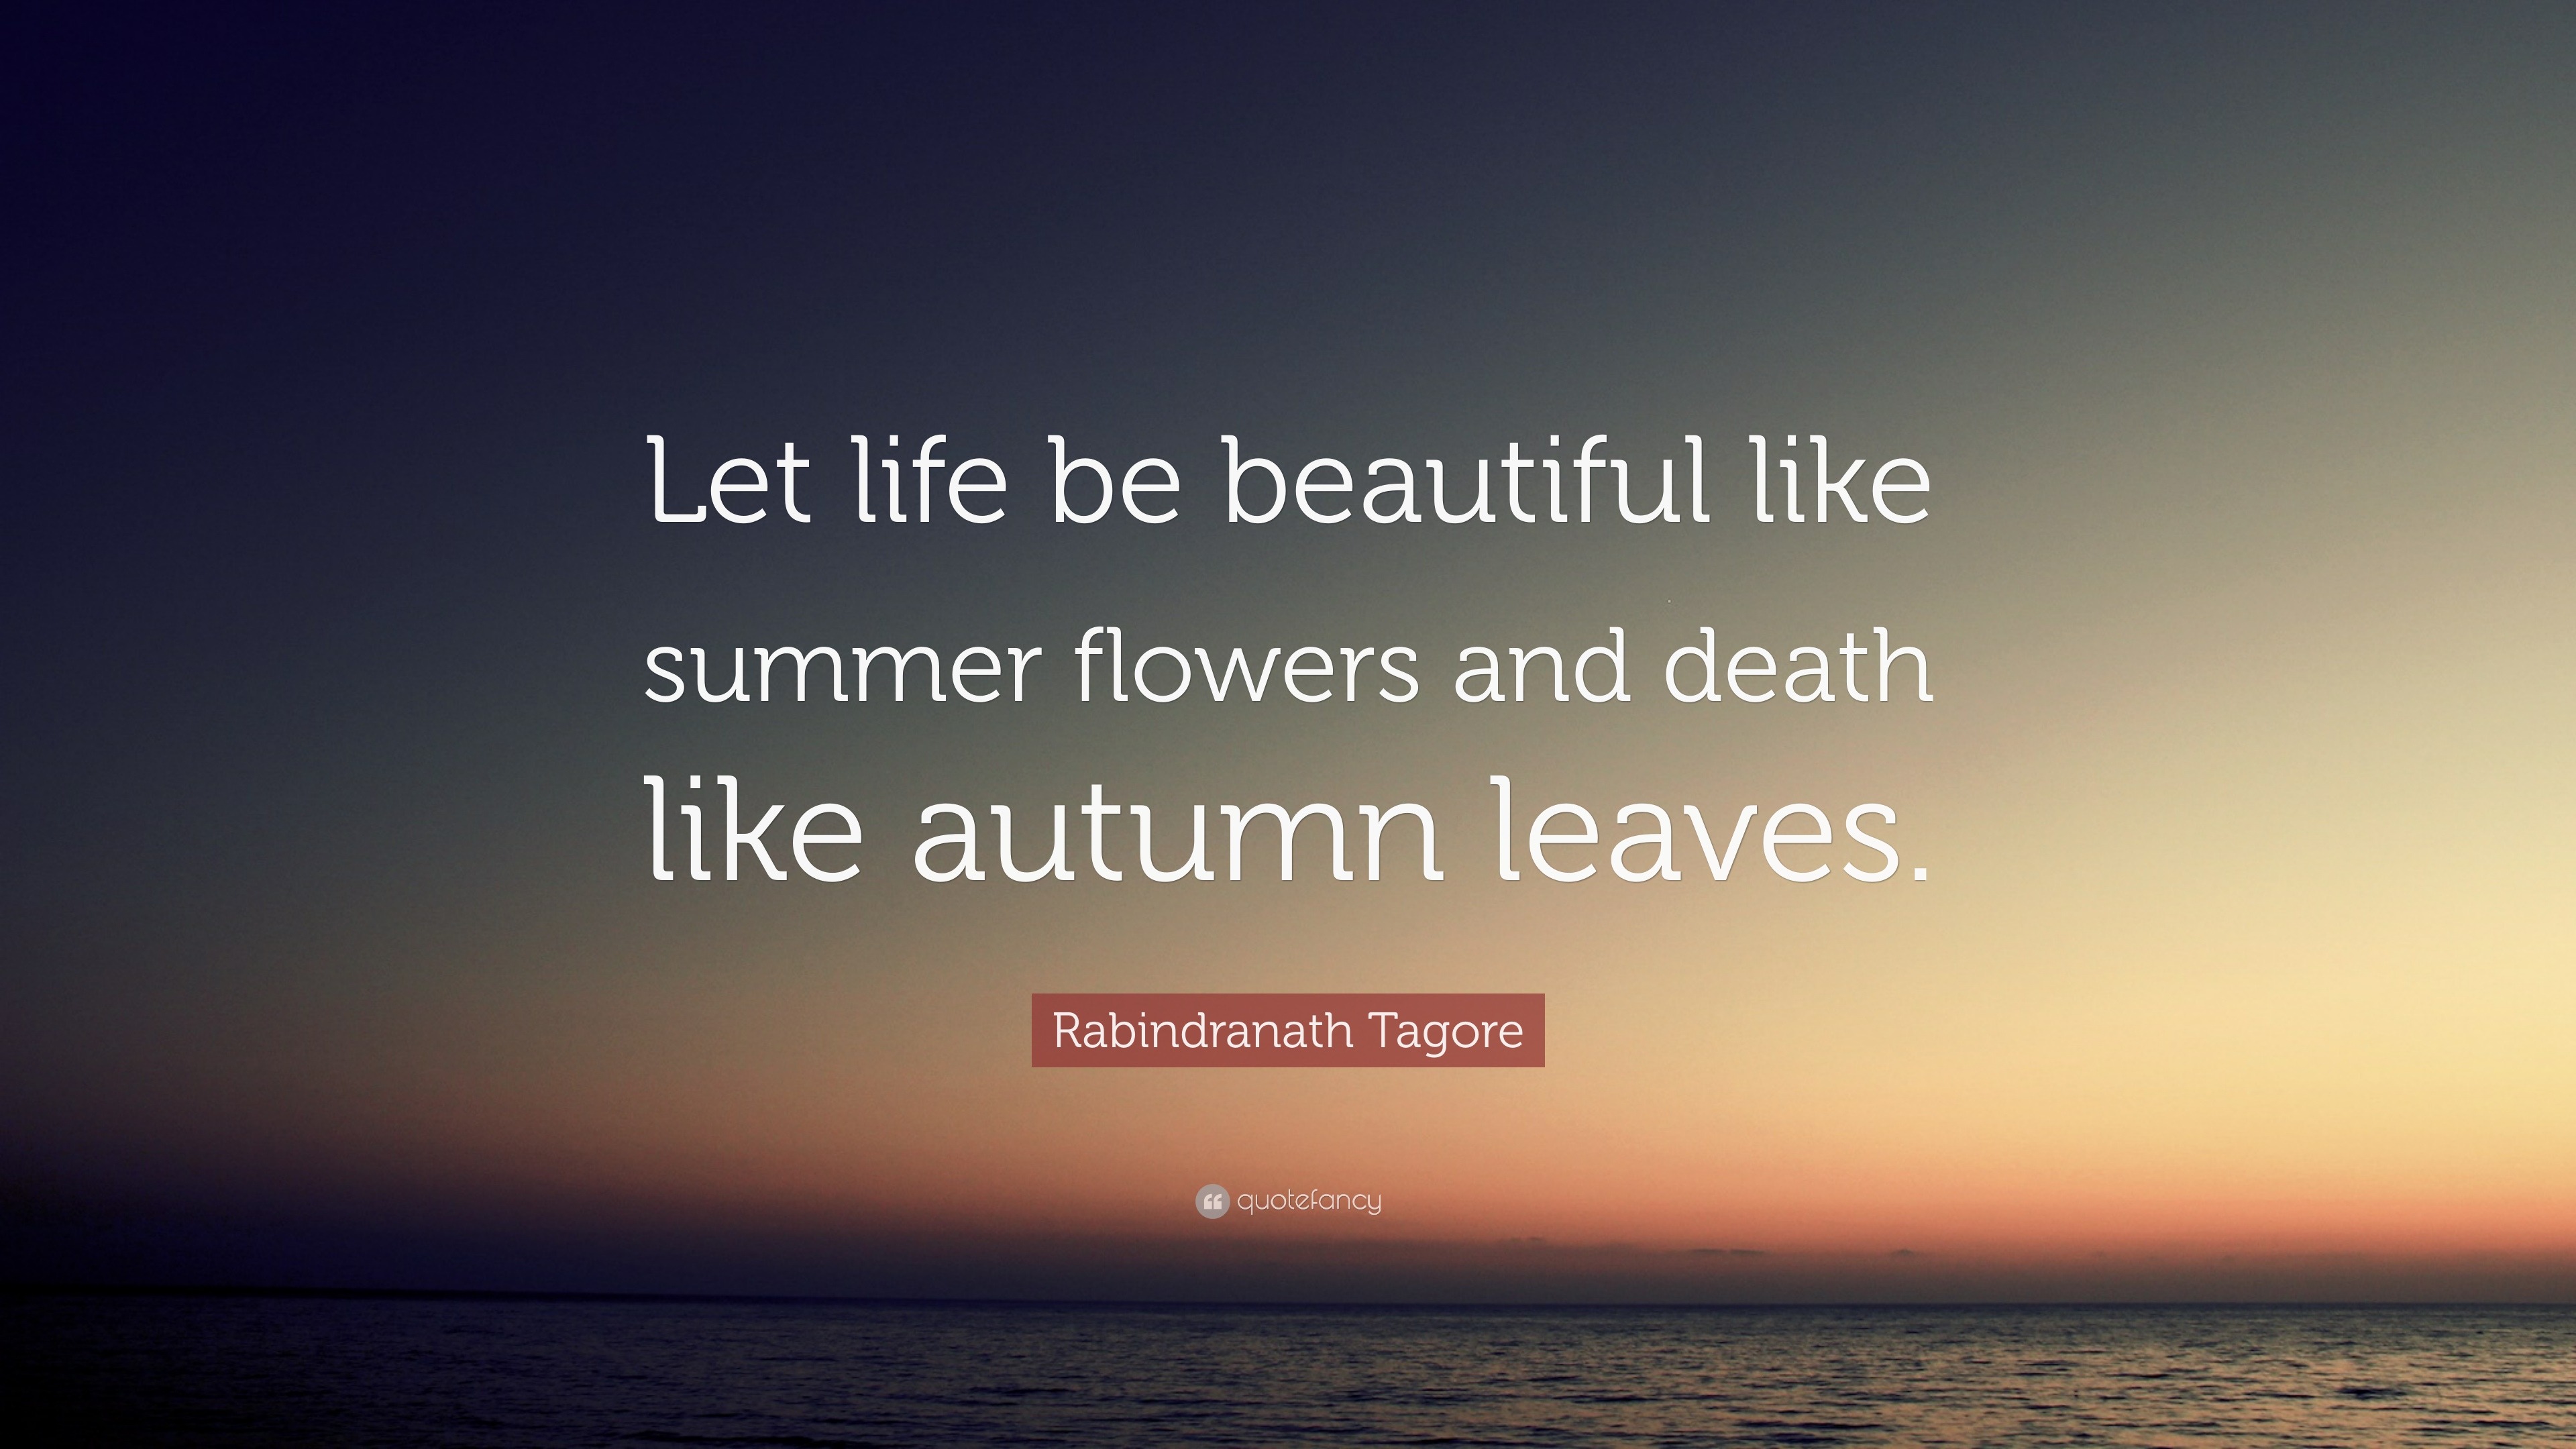 Rabindranath Tagore Quote “Let life be beautiful like summer flowers and like autumn